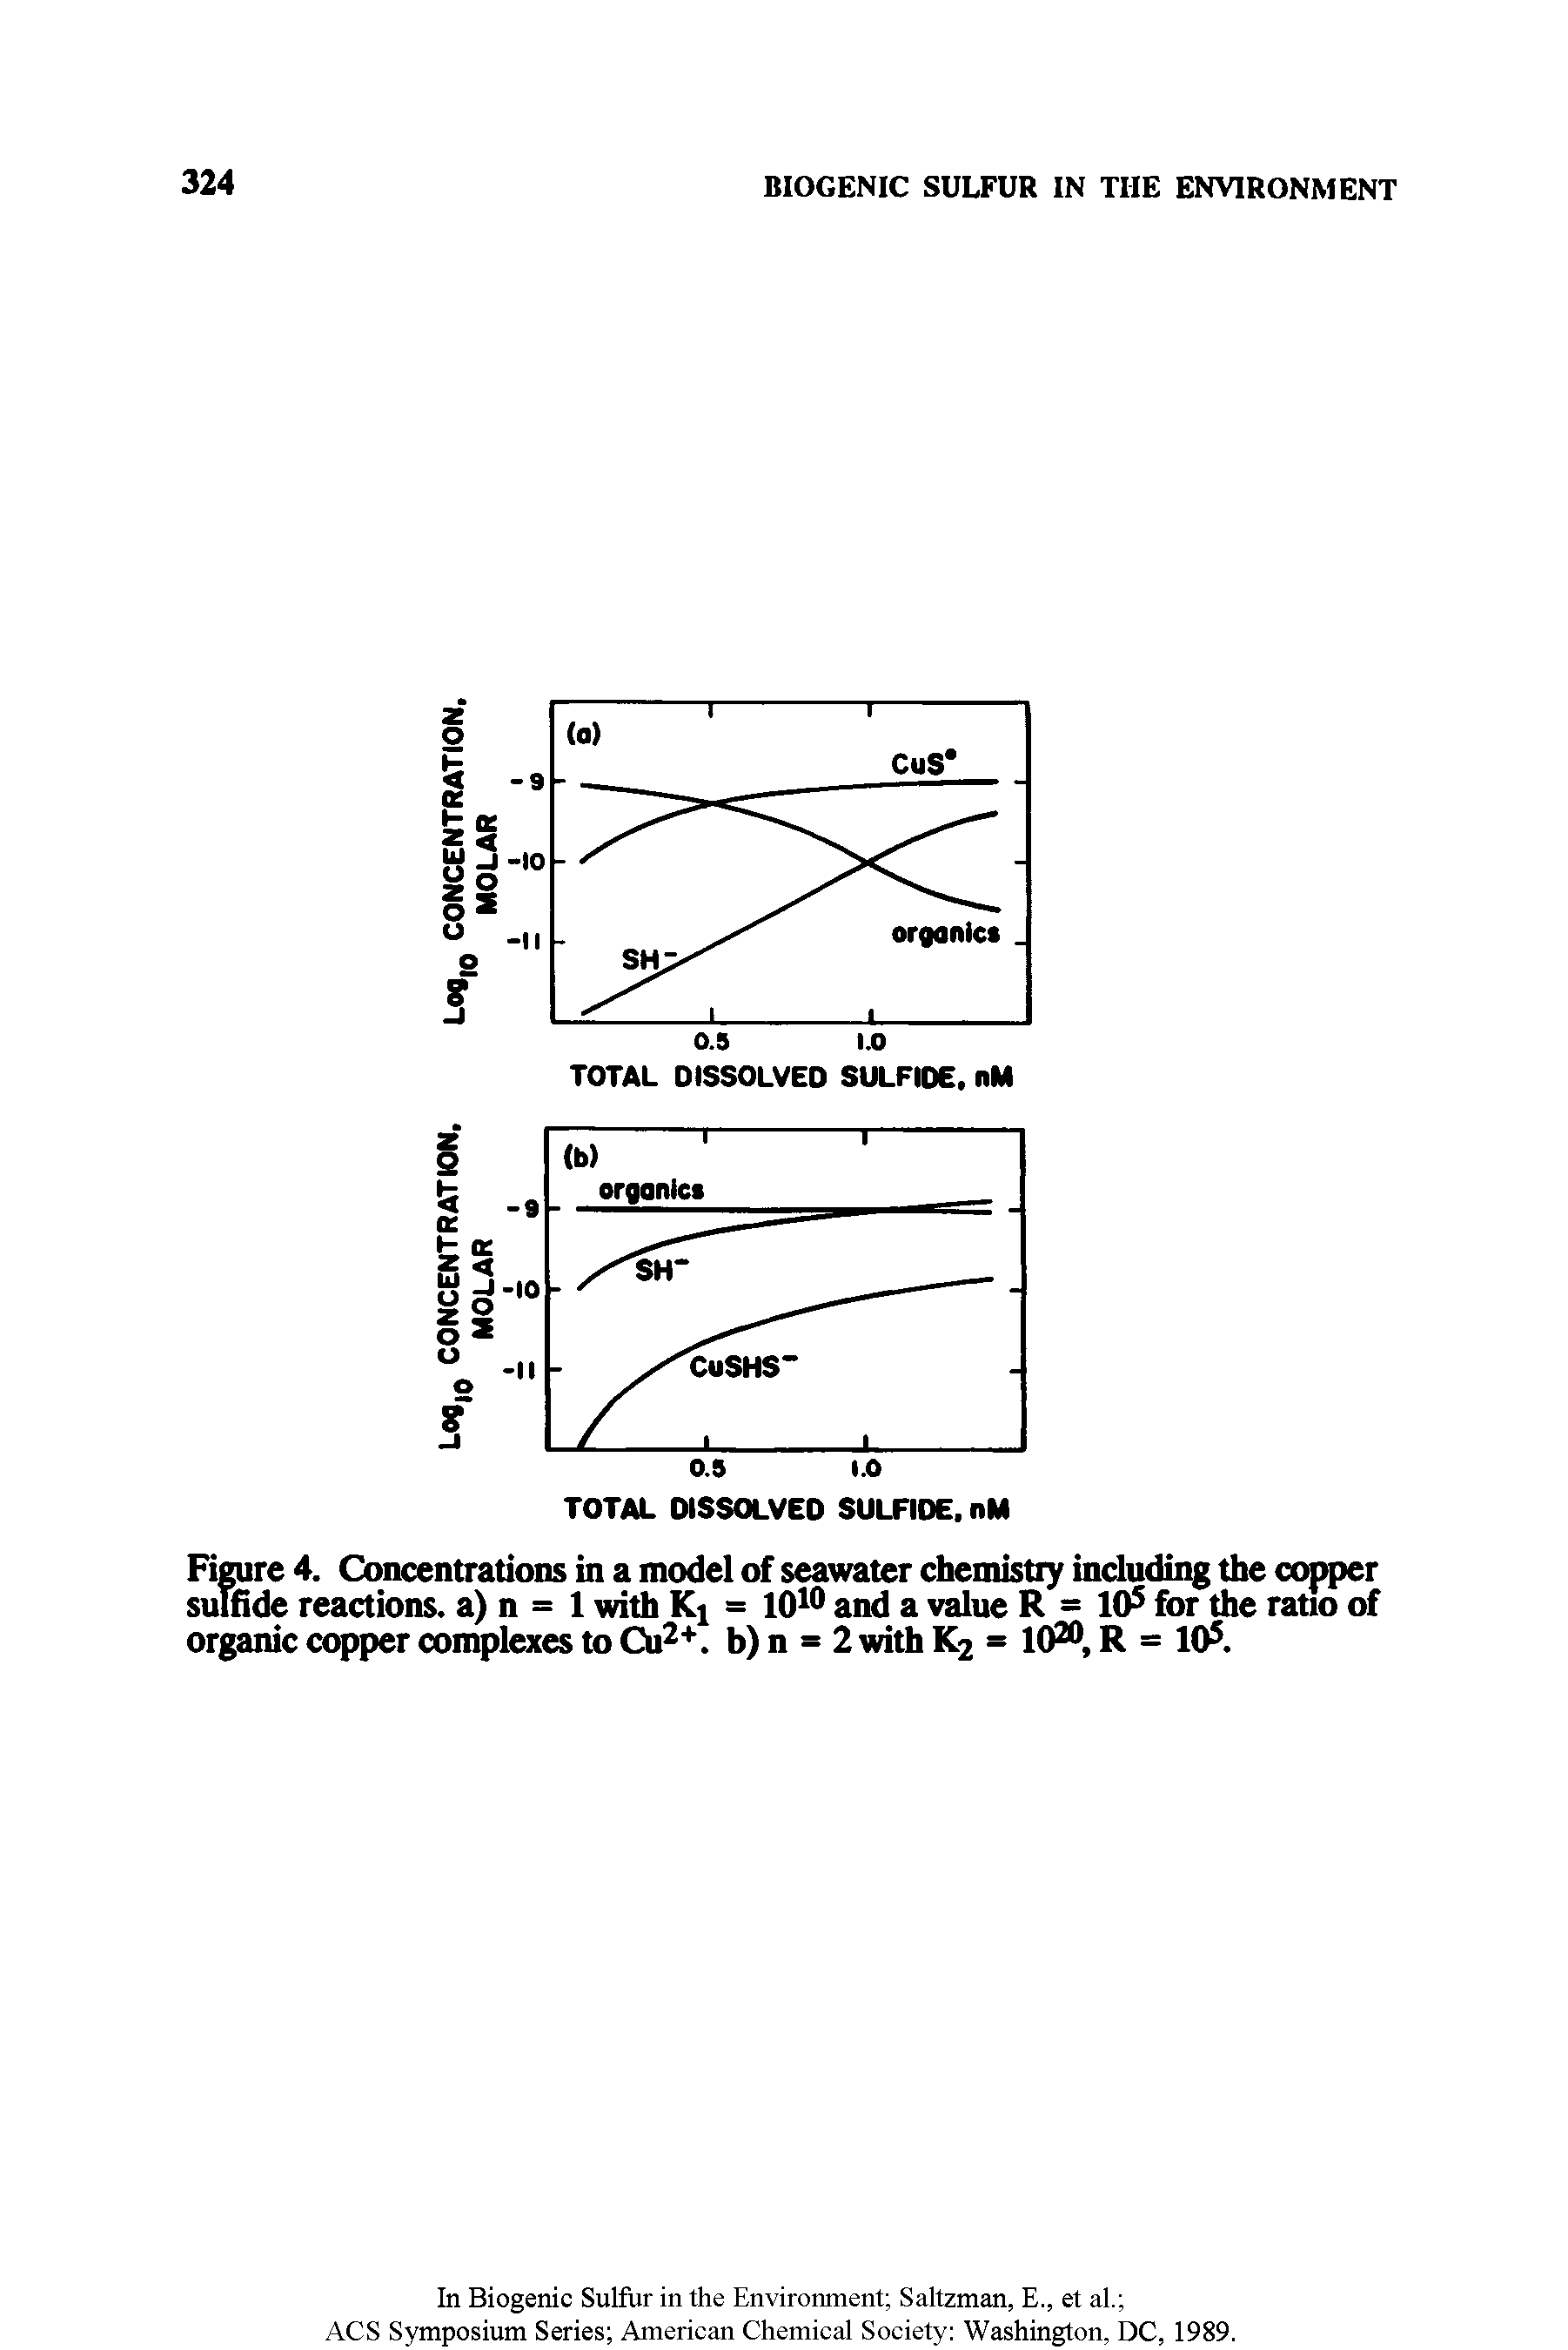 Figure 4. Concentrations in a model of seawater chemistry including the copper sulfide reactions, a) n = 1 with Kj = 1010 and a value R - 10s for the ratio of organic copper complexes to Cu2+. b) n = 2 with K2 = 1020, R = 105.